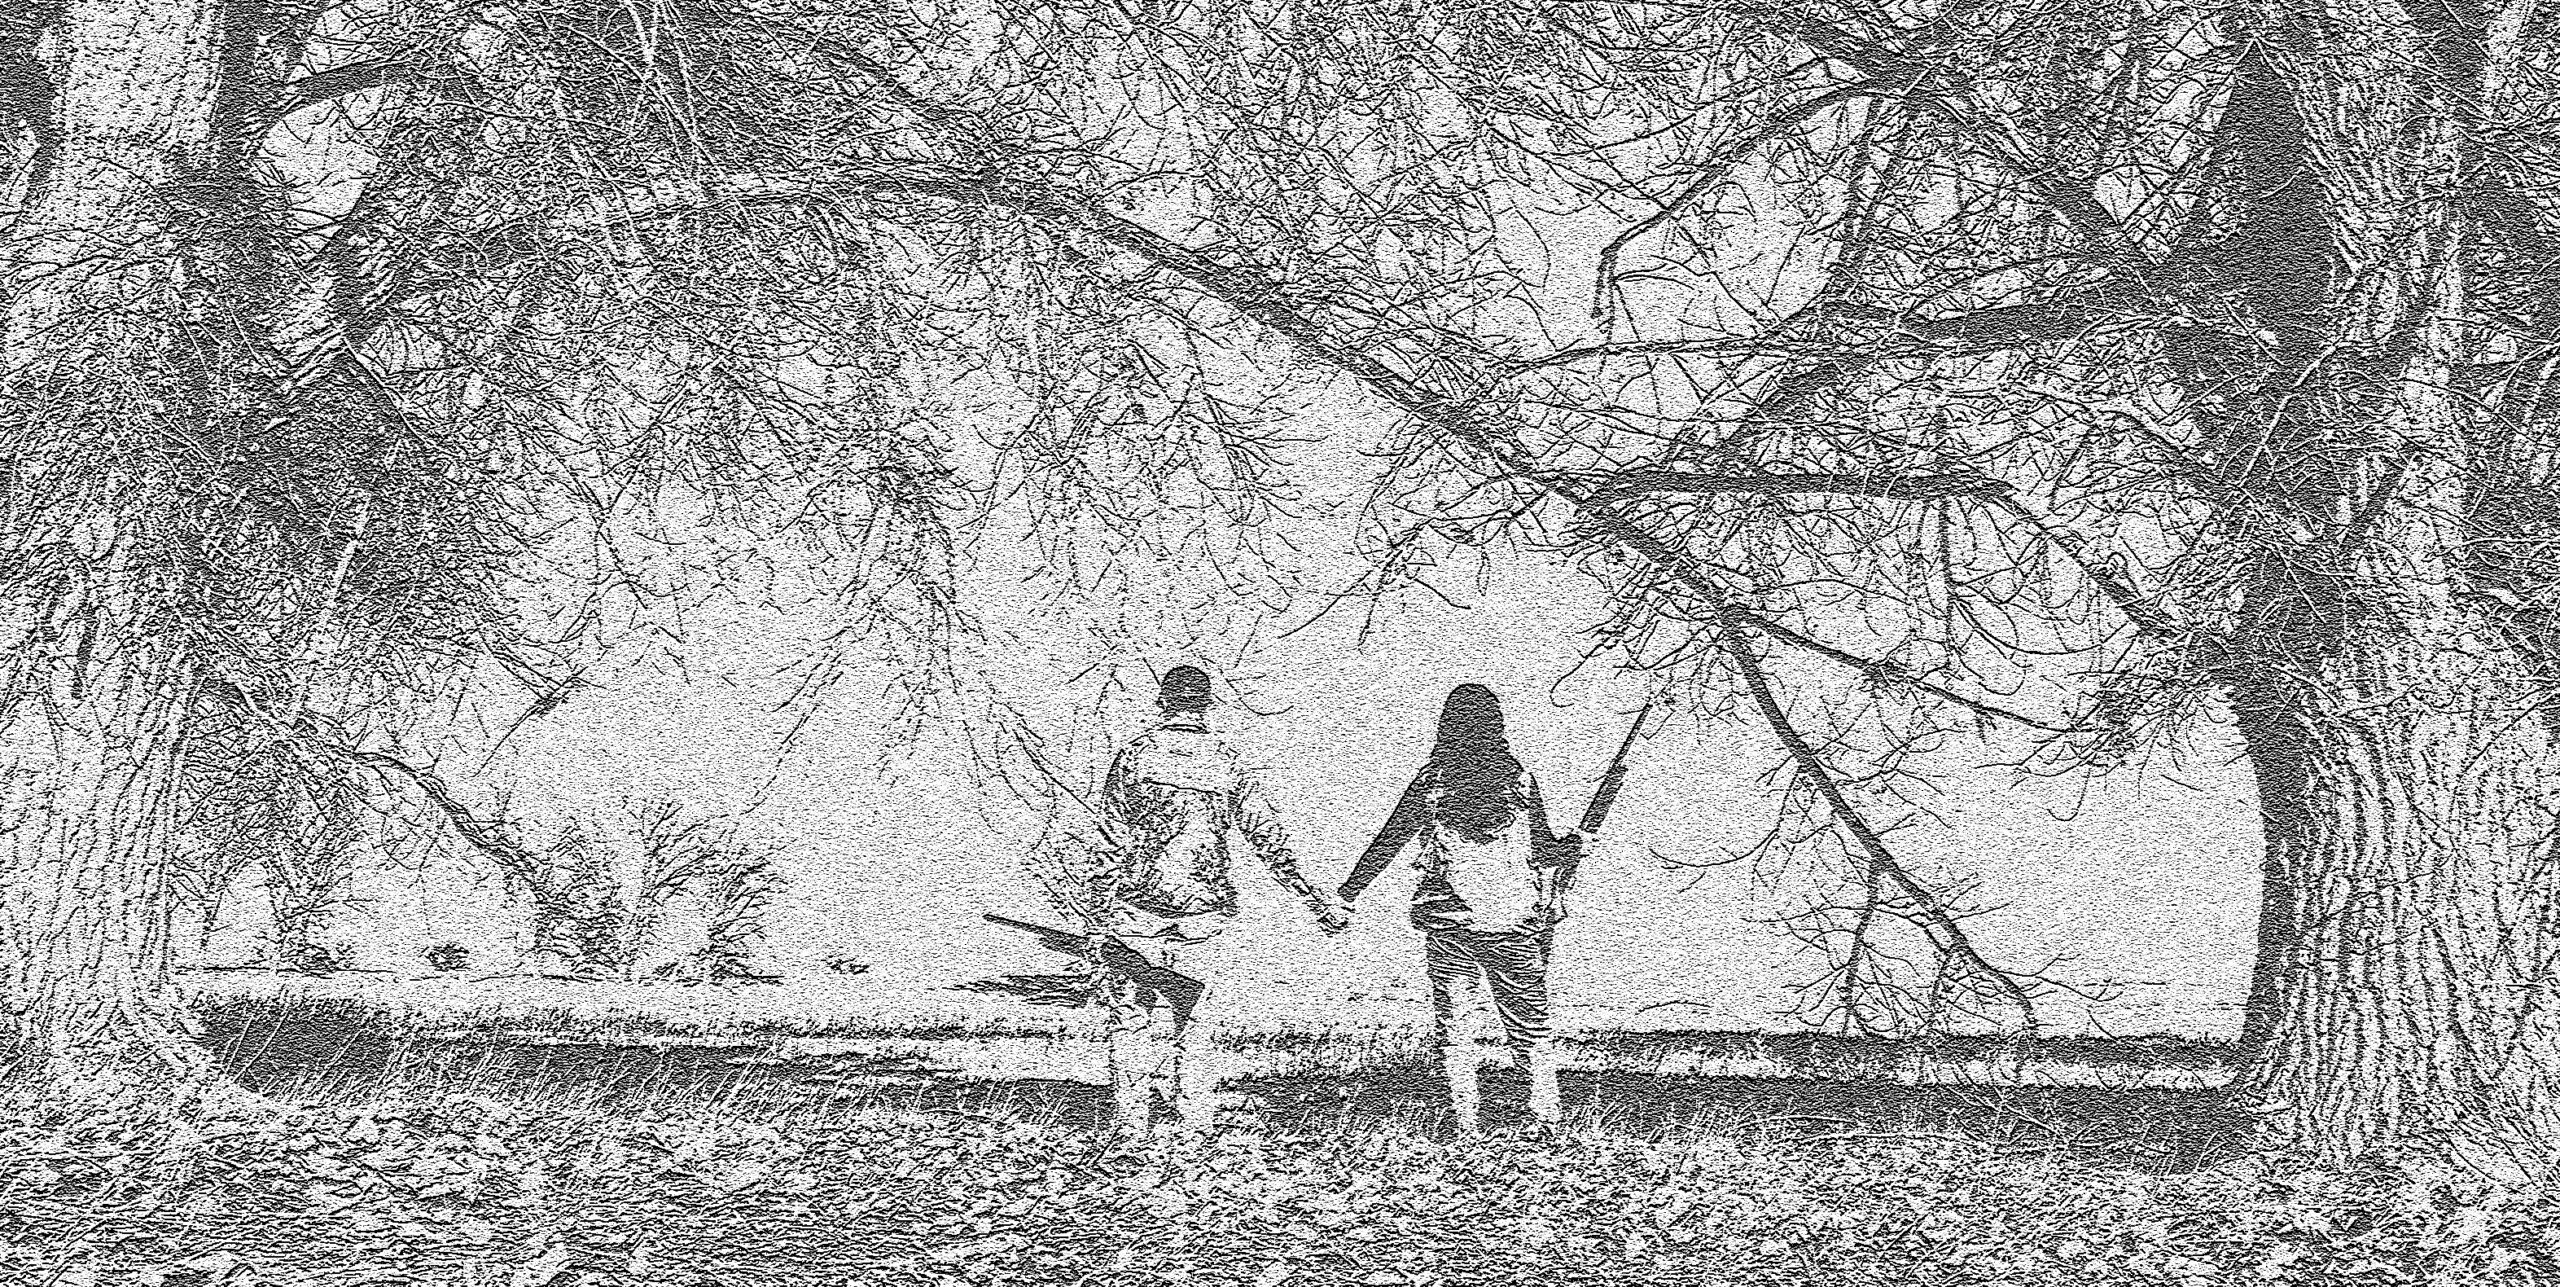 a black and white sketched image of a man and woman hunter holding hands